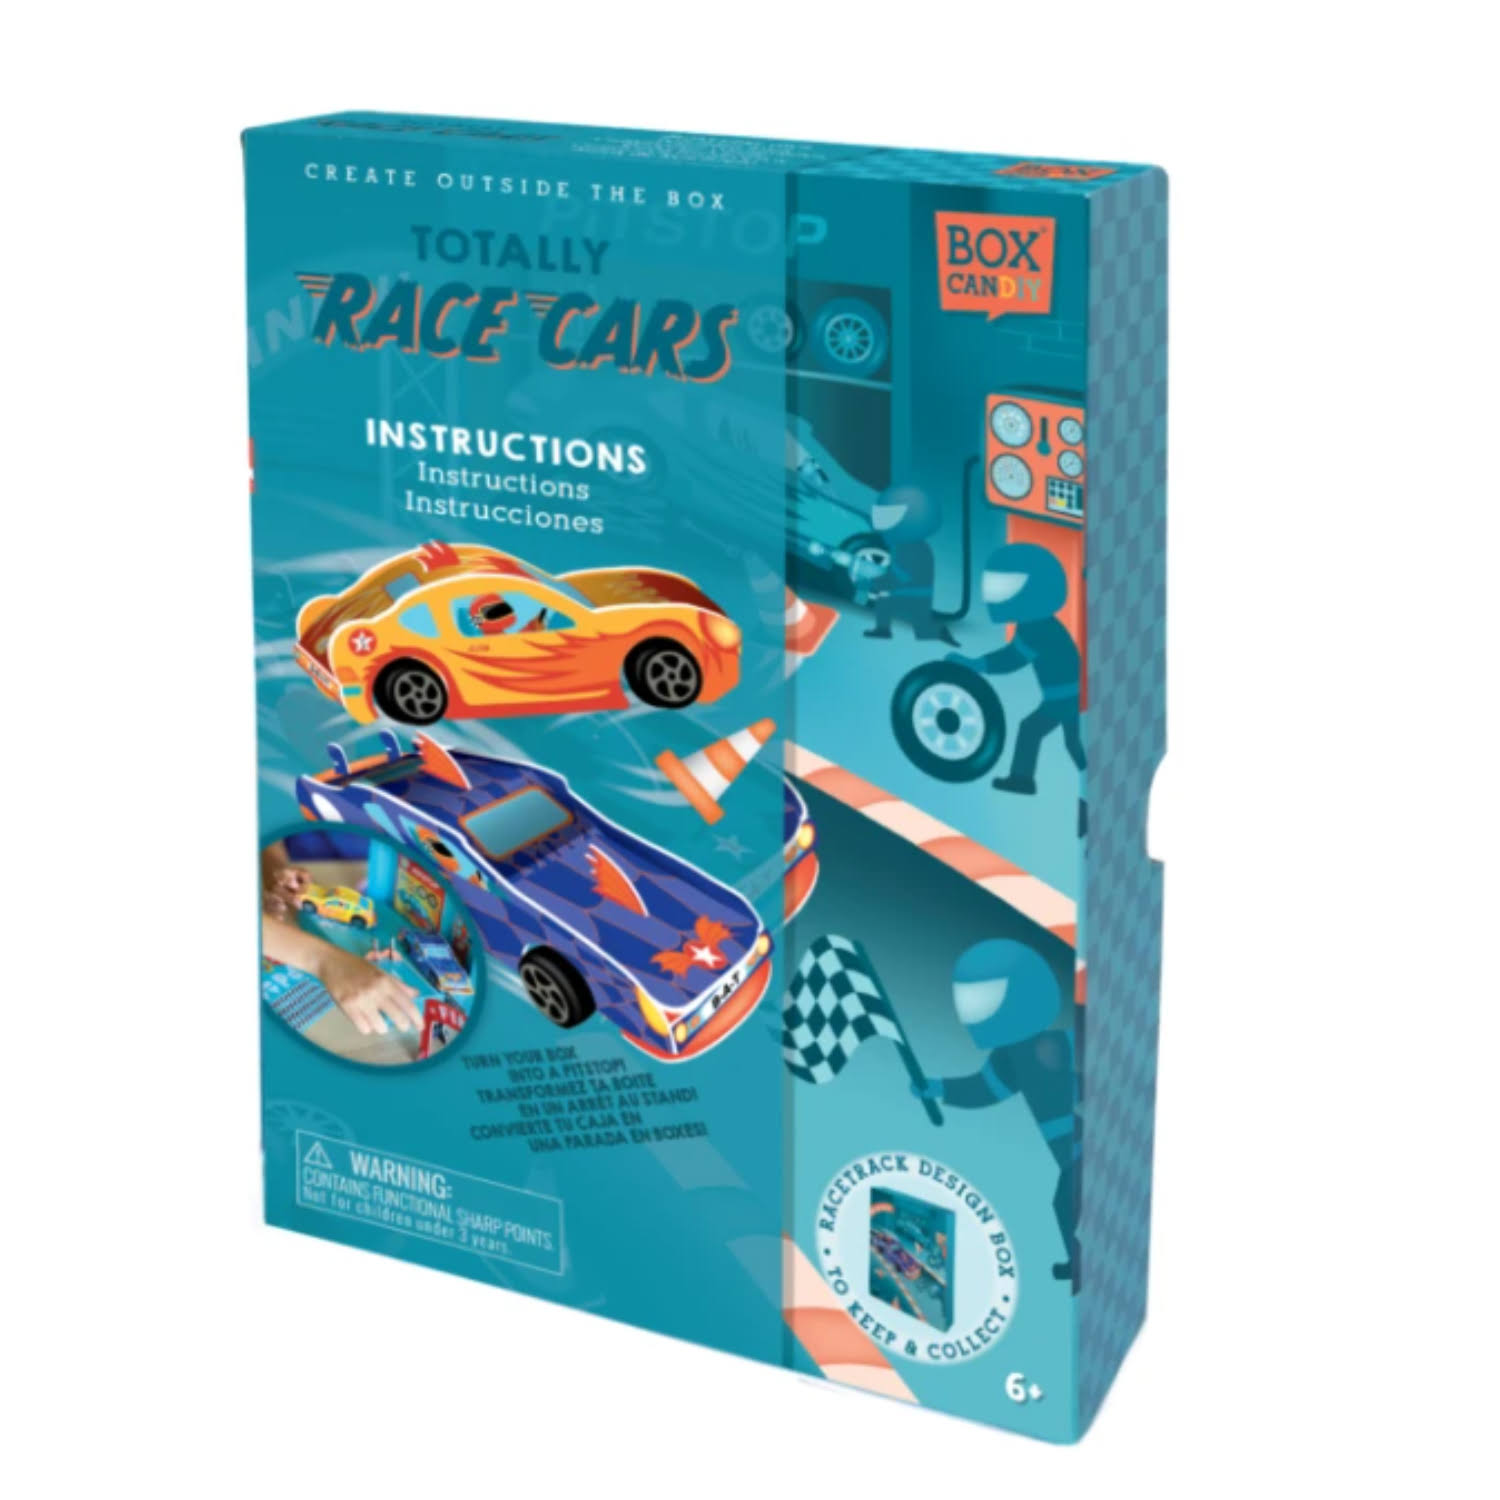 Box CanDIY - Totally Race Cars Build Your Own Pull-Back Cars